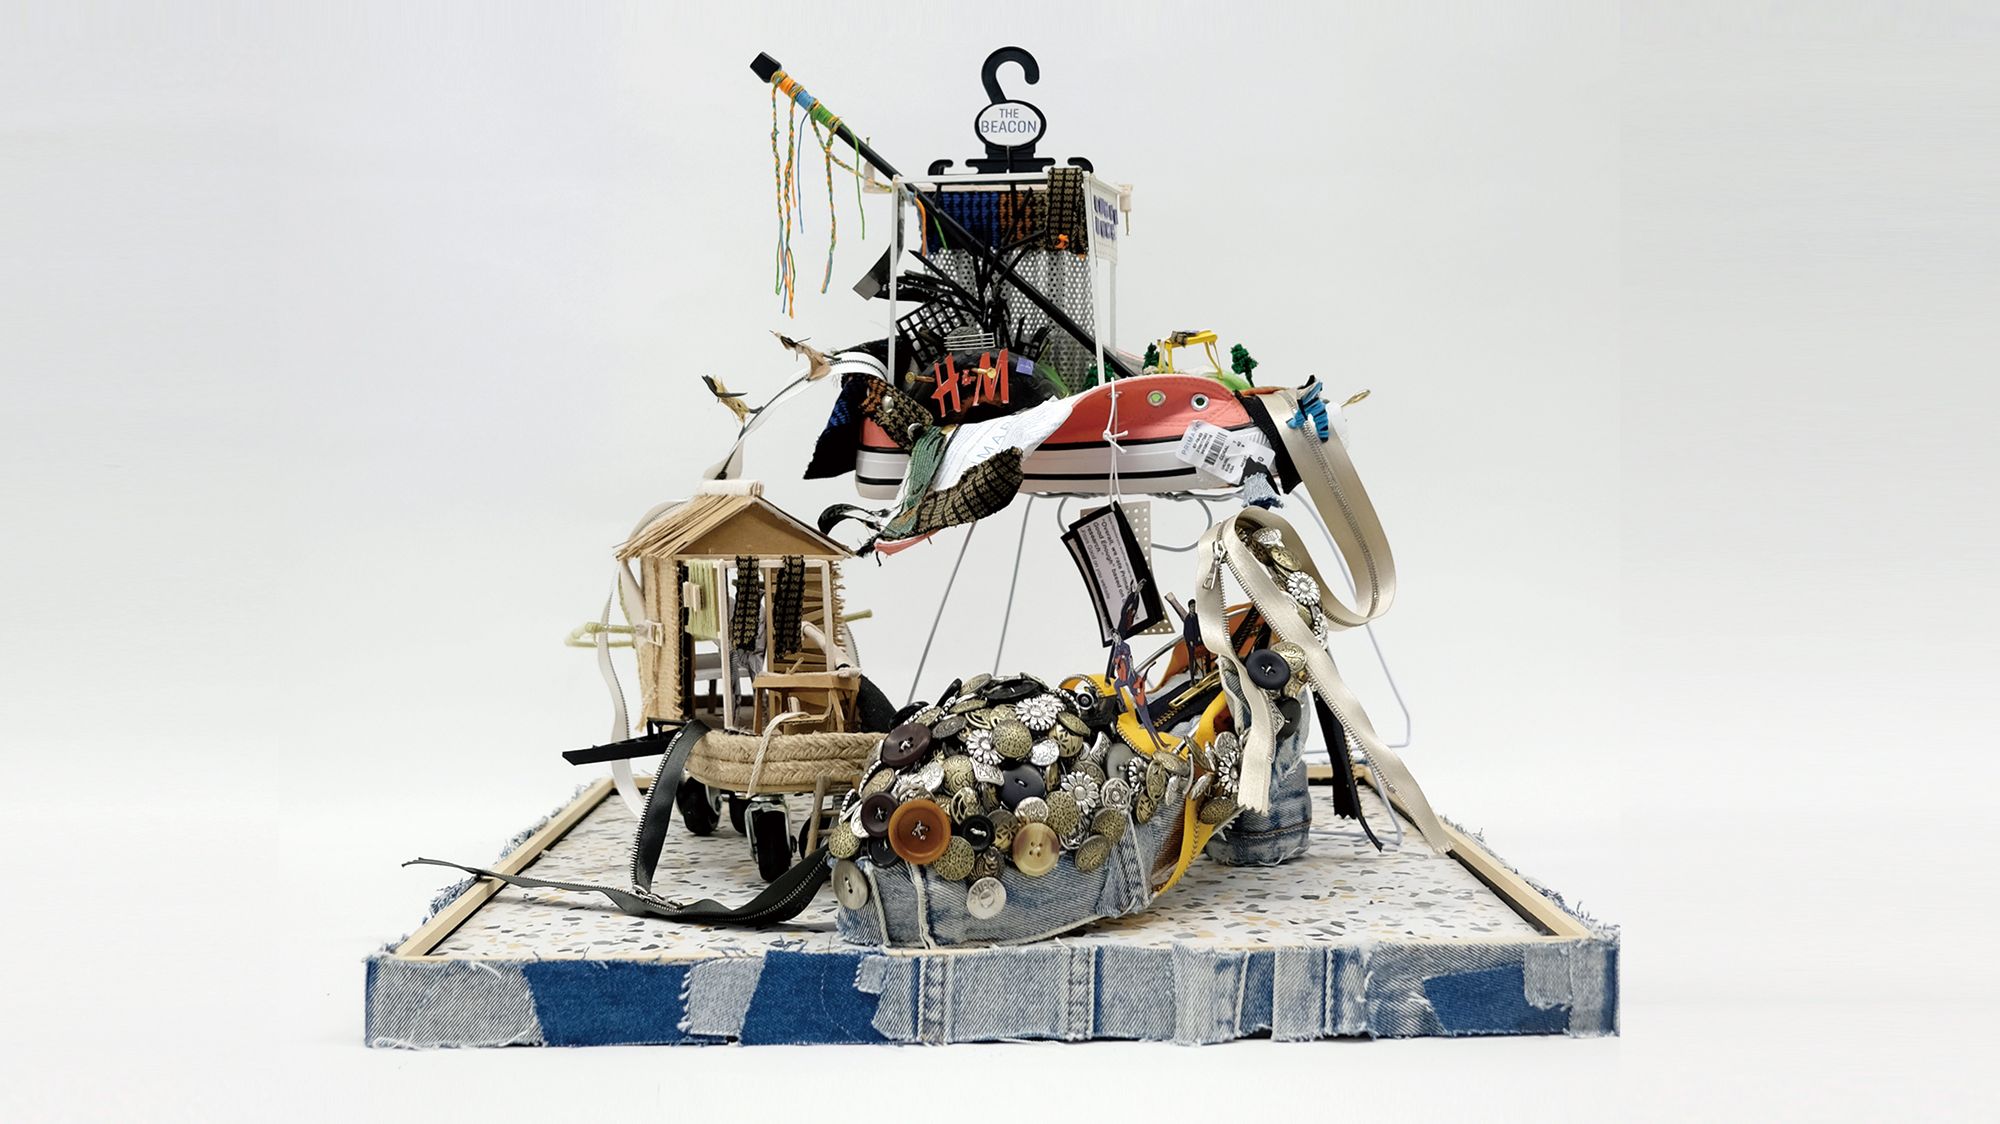 A pyramid of random objects including buttons, a split open trainer, sandal and topped with a plastic coat hanger, on a square slightly raised platform, edged with scraps of denim.